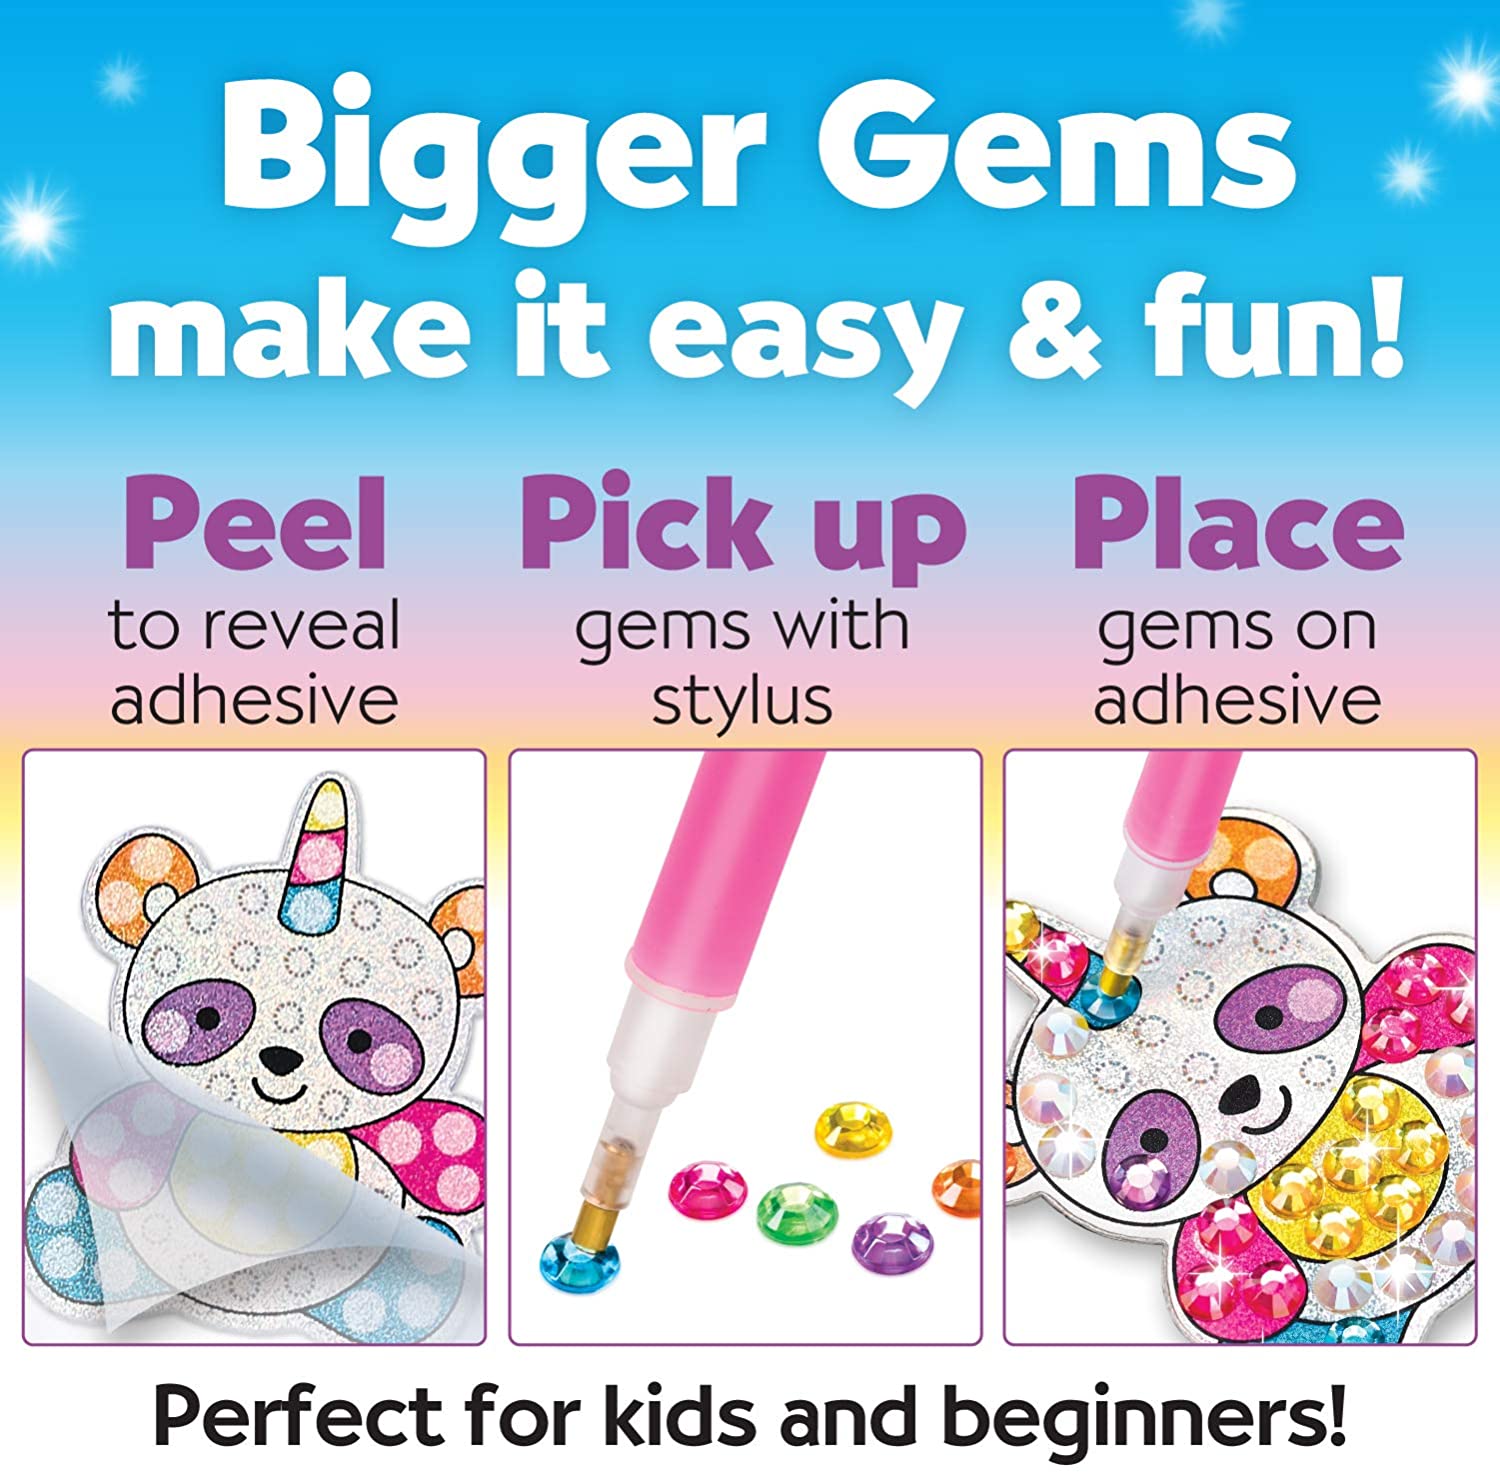 Big Gem Diamond Painting Craft Kit Review - Glitter On A Dime